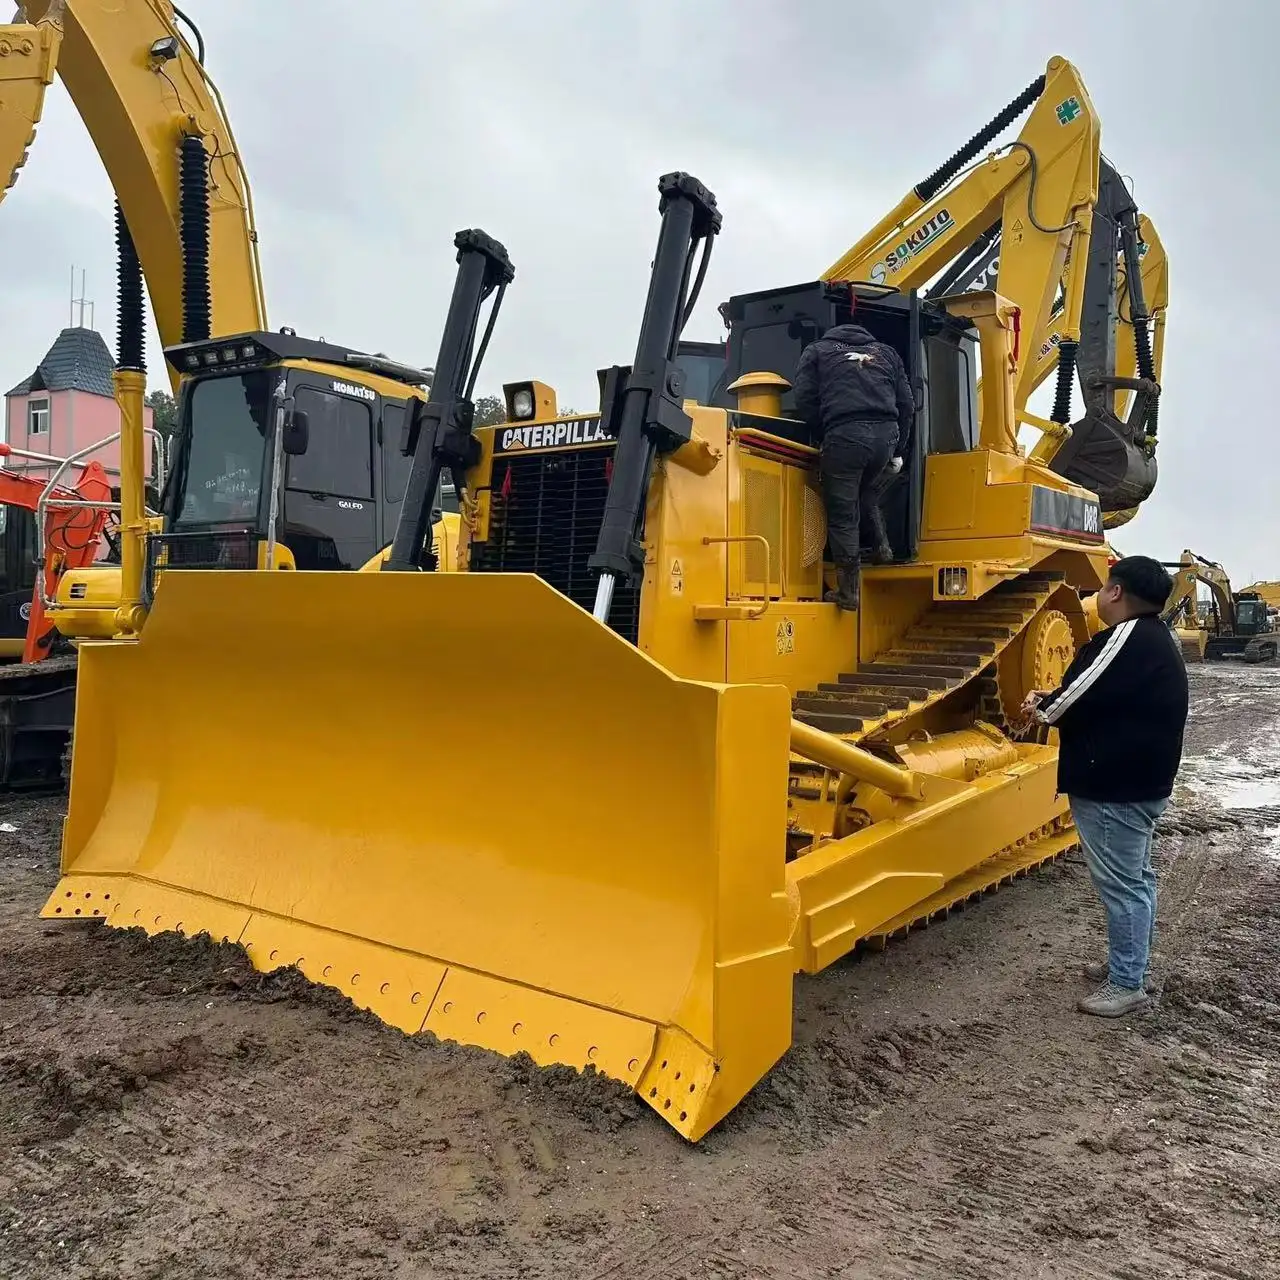 Popular hot selling used machinery CAT D8R bulldozer machine Caterpillar machinery CAT D8R used bulldozers